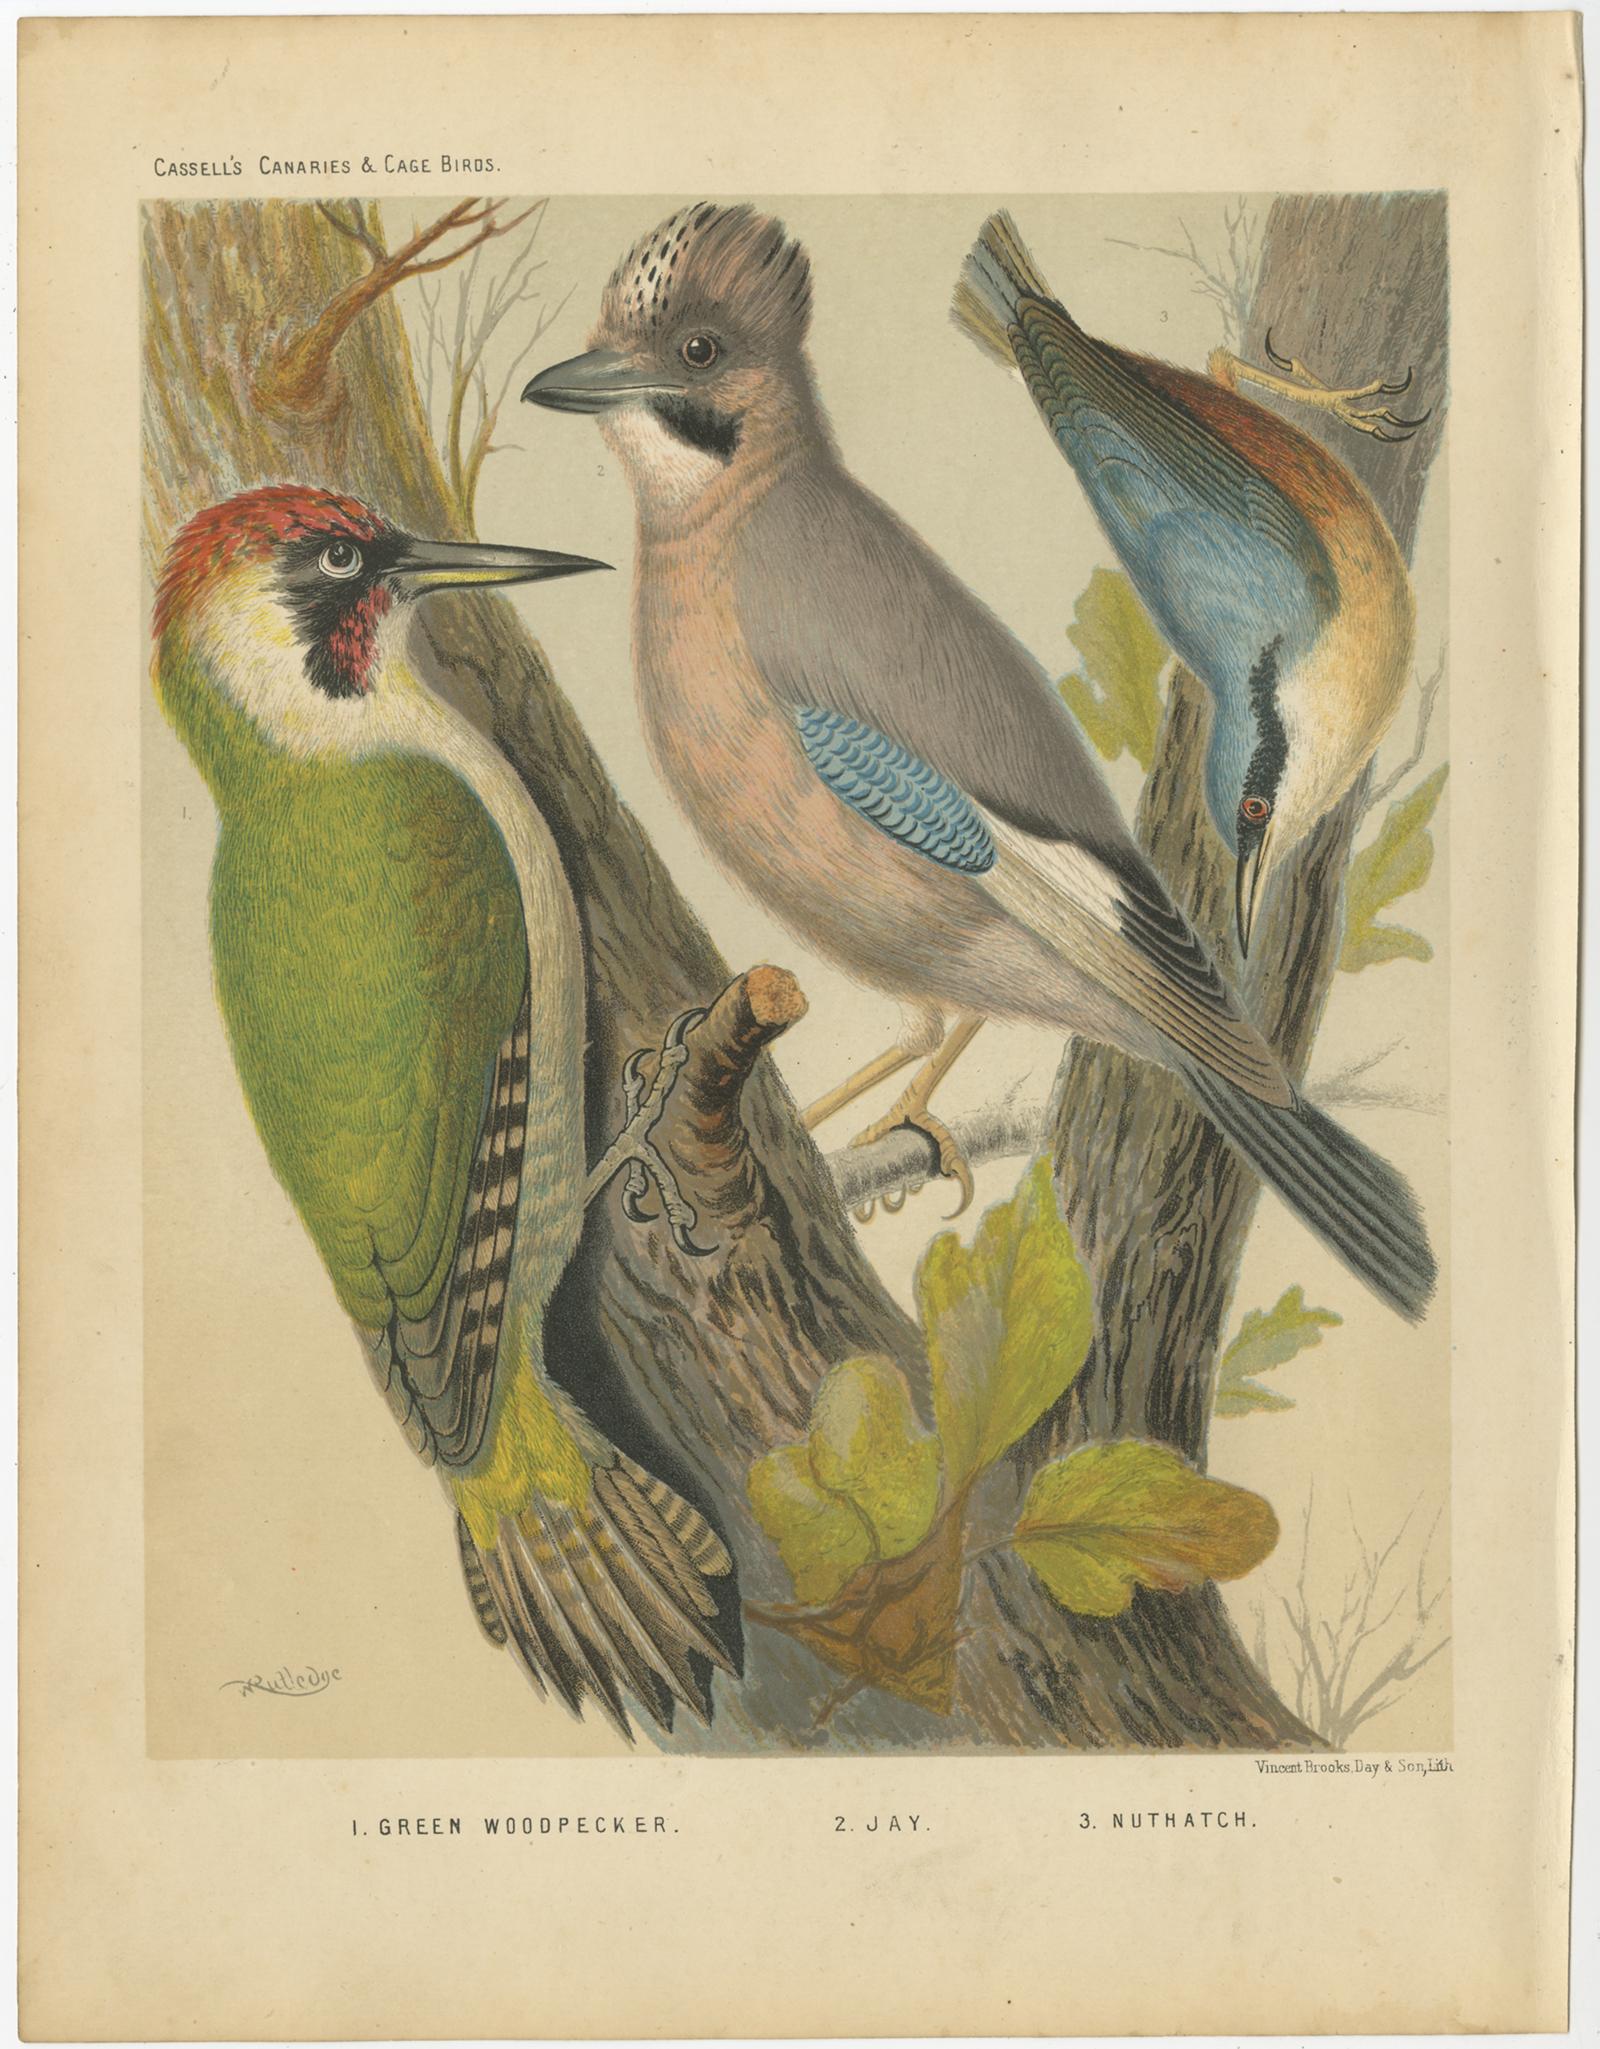 Antique bird print titled '1. Green Woodpecker 2. Jay 3. Nuthatch ' Old bird print depicting the European green woodpecker, Jay, Nuthatch. This print originates from: 'Illustrated book of canaries and cage-birds' by W. A. Blackston, W. Swaysland and